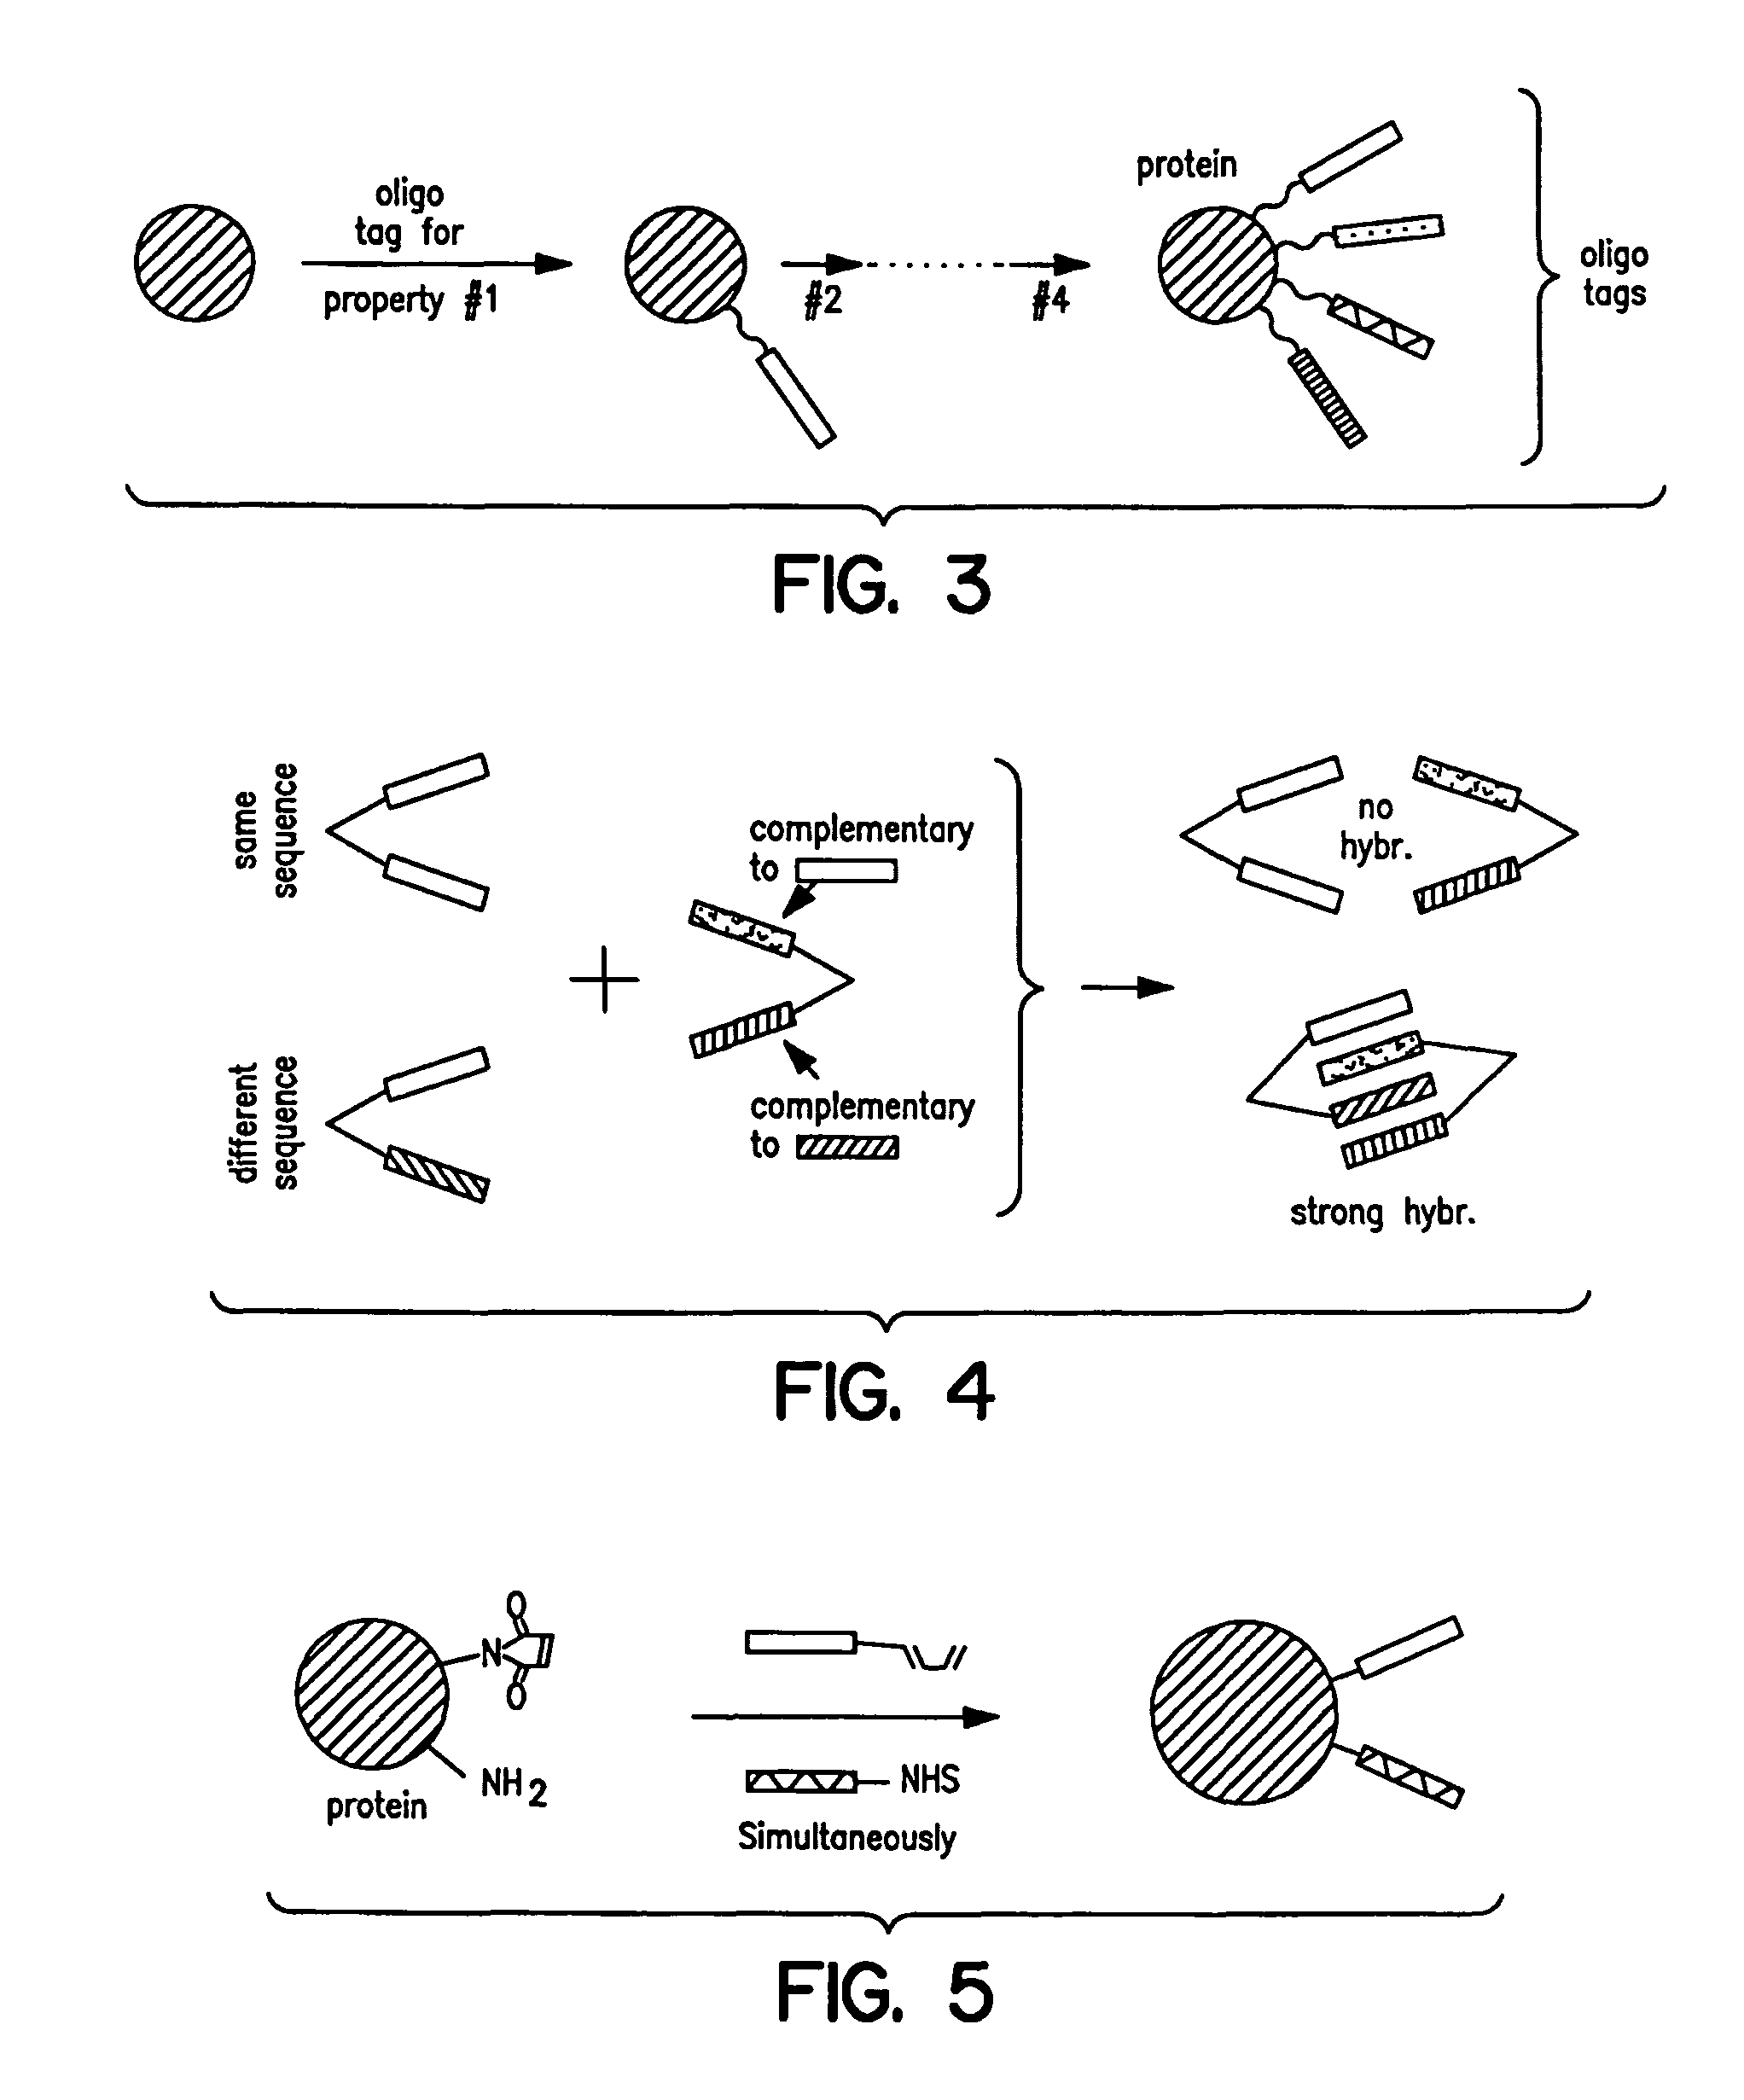 Capture compounds, collections thereof and methods for analyzing the proteome and complex compositions